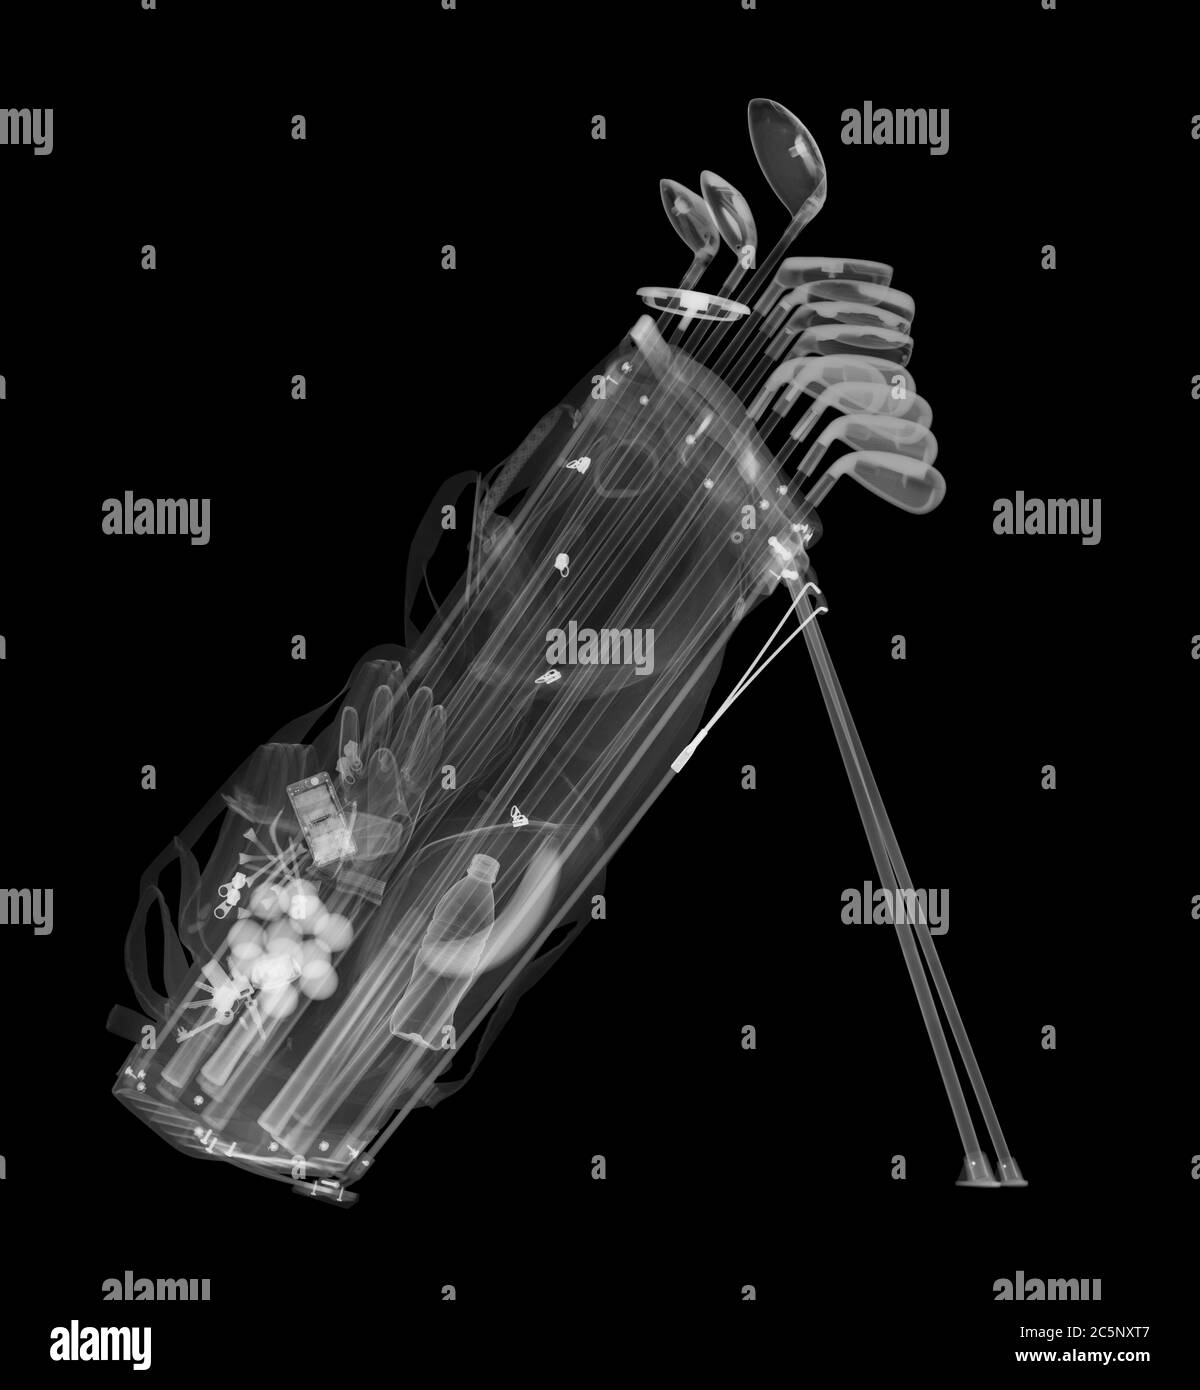 Golf clubs in bag, X-ray. Stock Photo